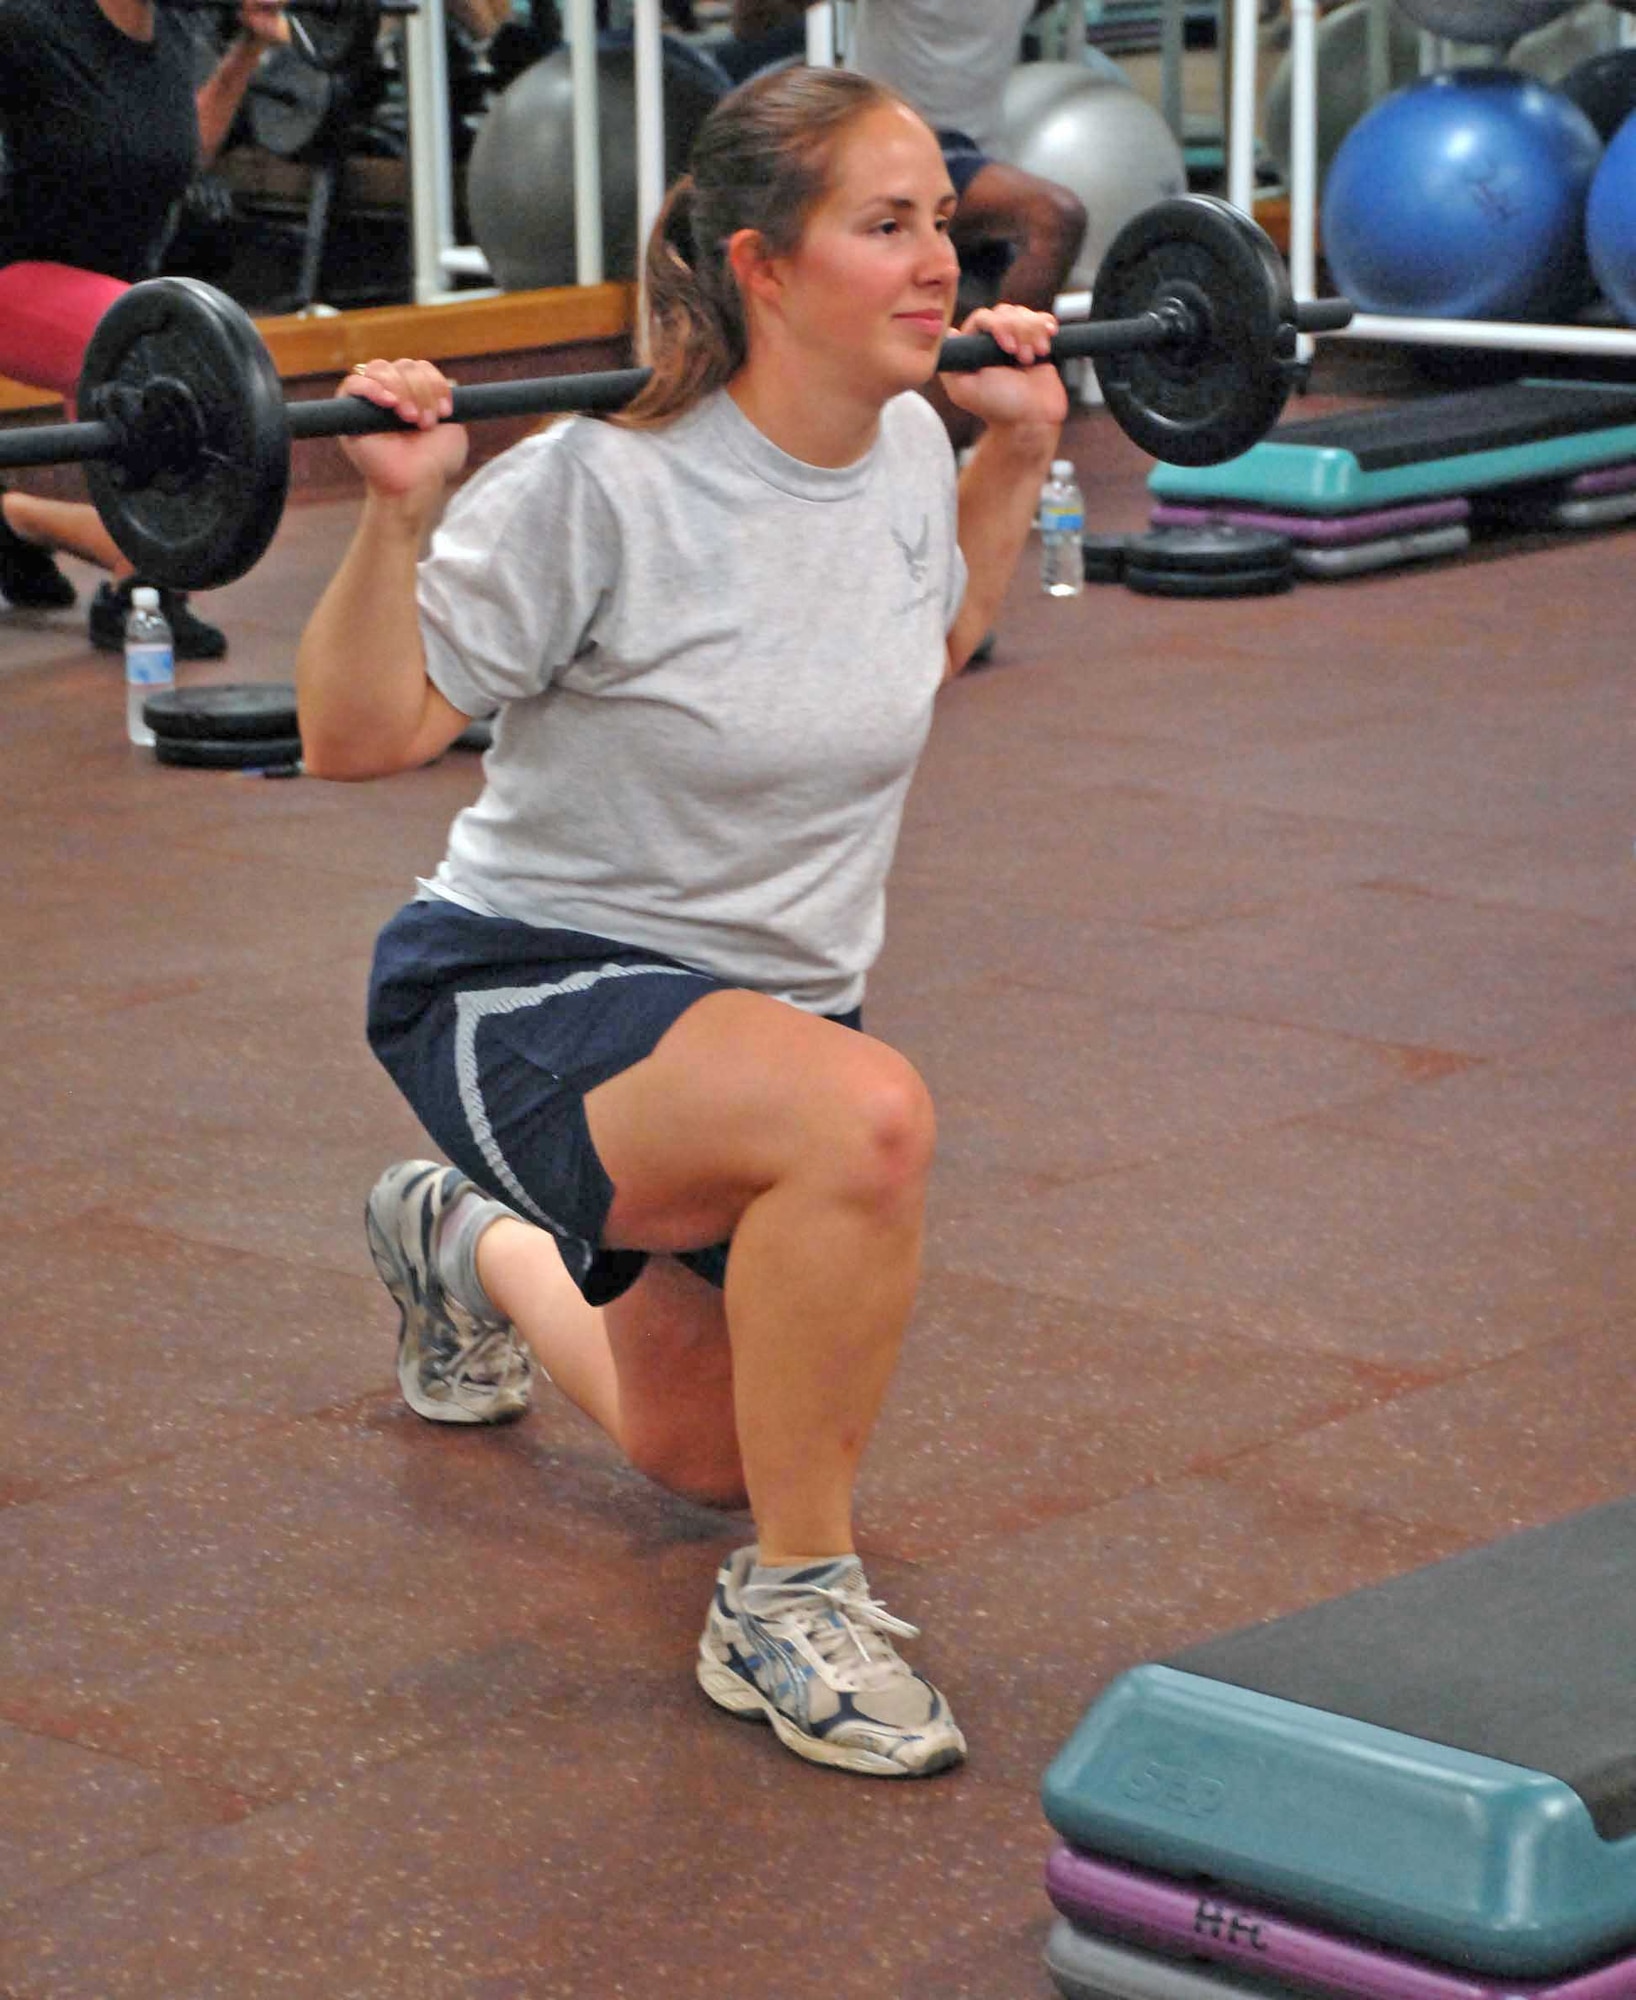 Second Lt. Melissa Croy does lunges during a workout Aug. 17, 2009, at the fitness center at Beale Air Force Base, Calif. Lieutenant Croy is one of the certified instructors for the new Body Pump program recently implemented to promote fitness at Beale.  (U.S. Air Force photo/Sandy Healy)